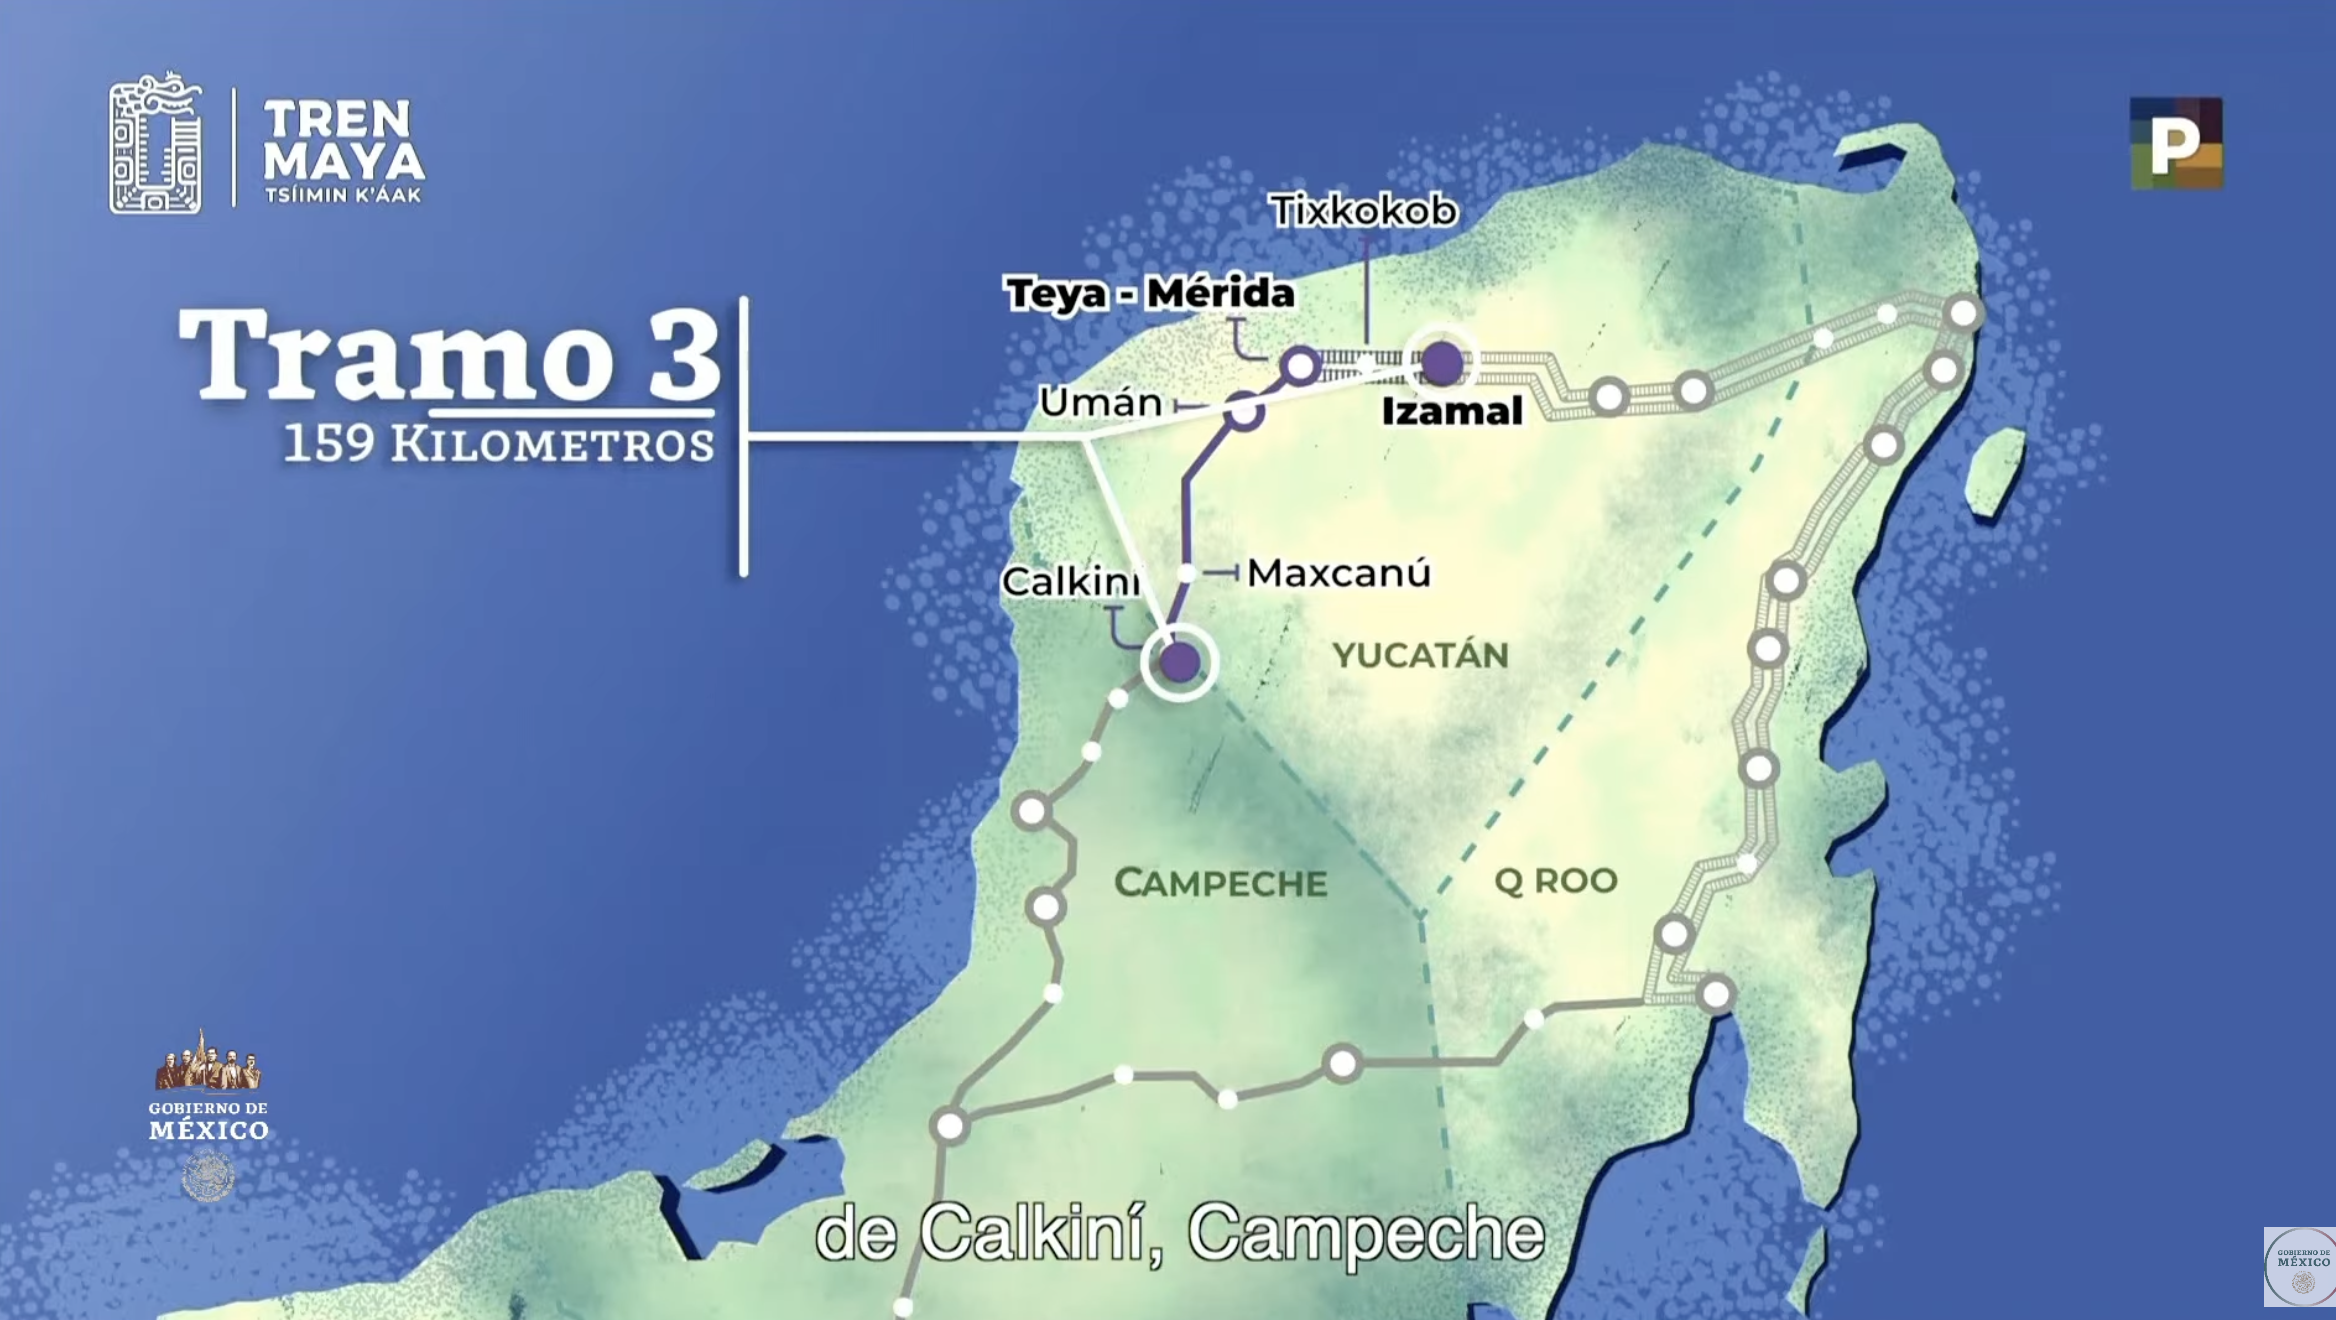 Section 3 of the Mayan Train runs from Calkiní to Izamal and has more than 150 kilometers of track.